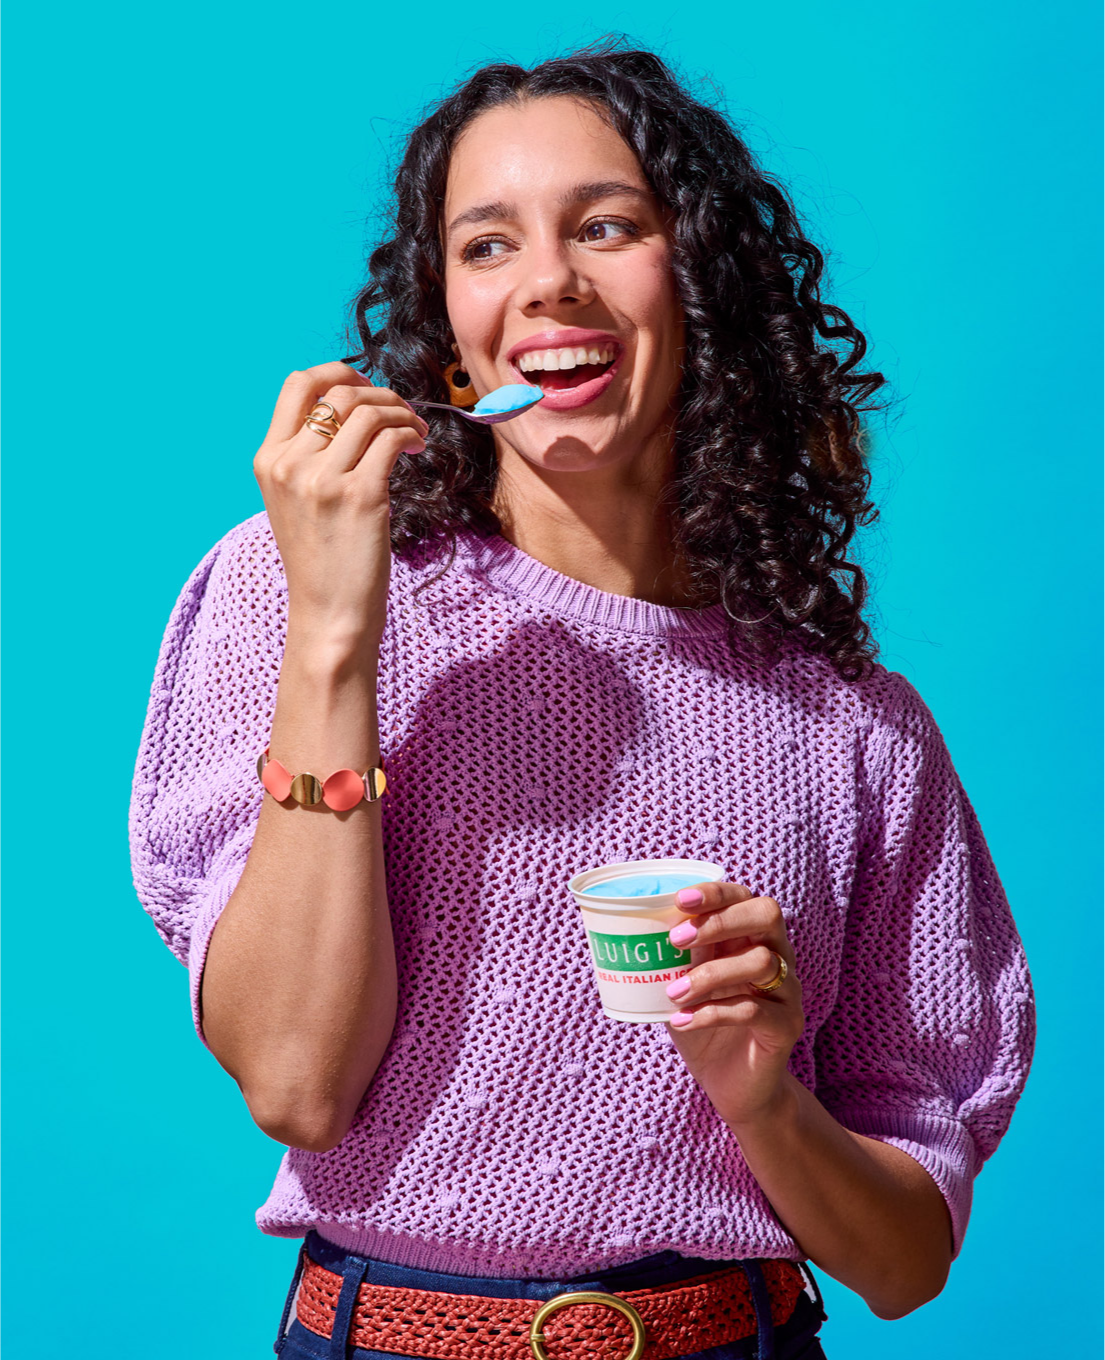 Woman eating blue raspberry LUIGI'S Real Italian Ice. Woman is smiling, wearing a purple top, and is holding the spoon of blue raspberry Italian ice up to her mouth.